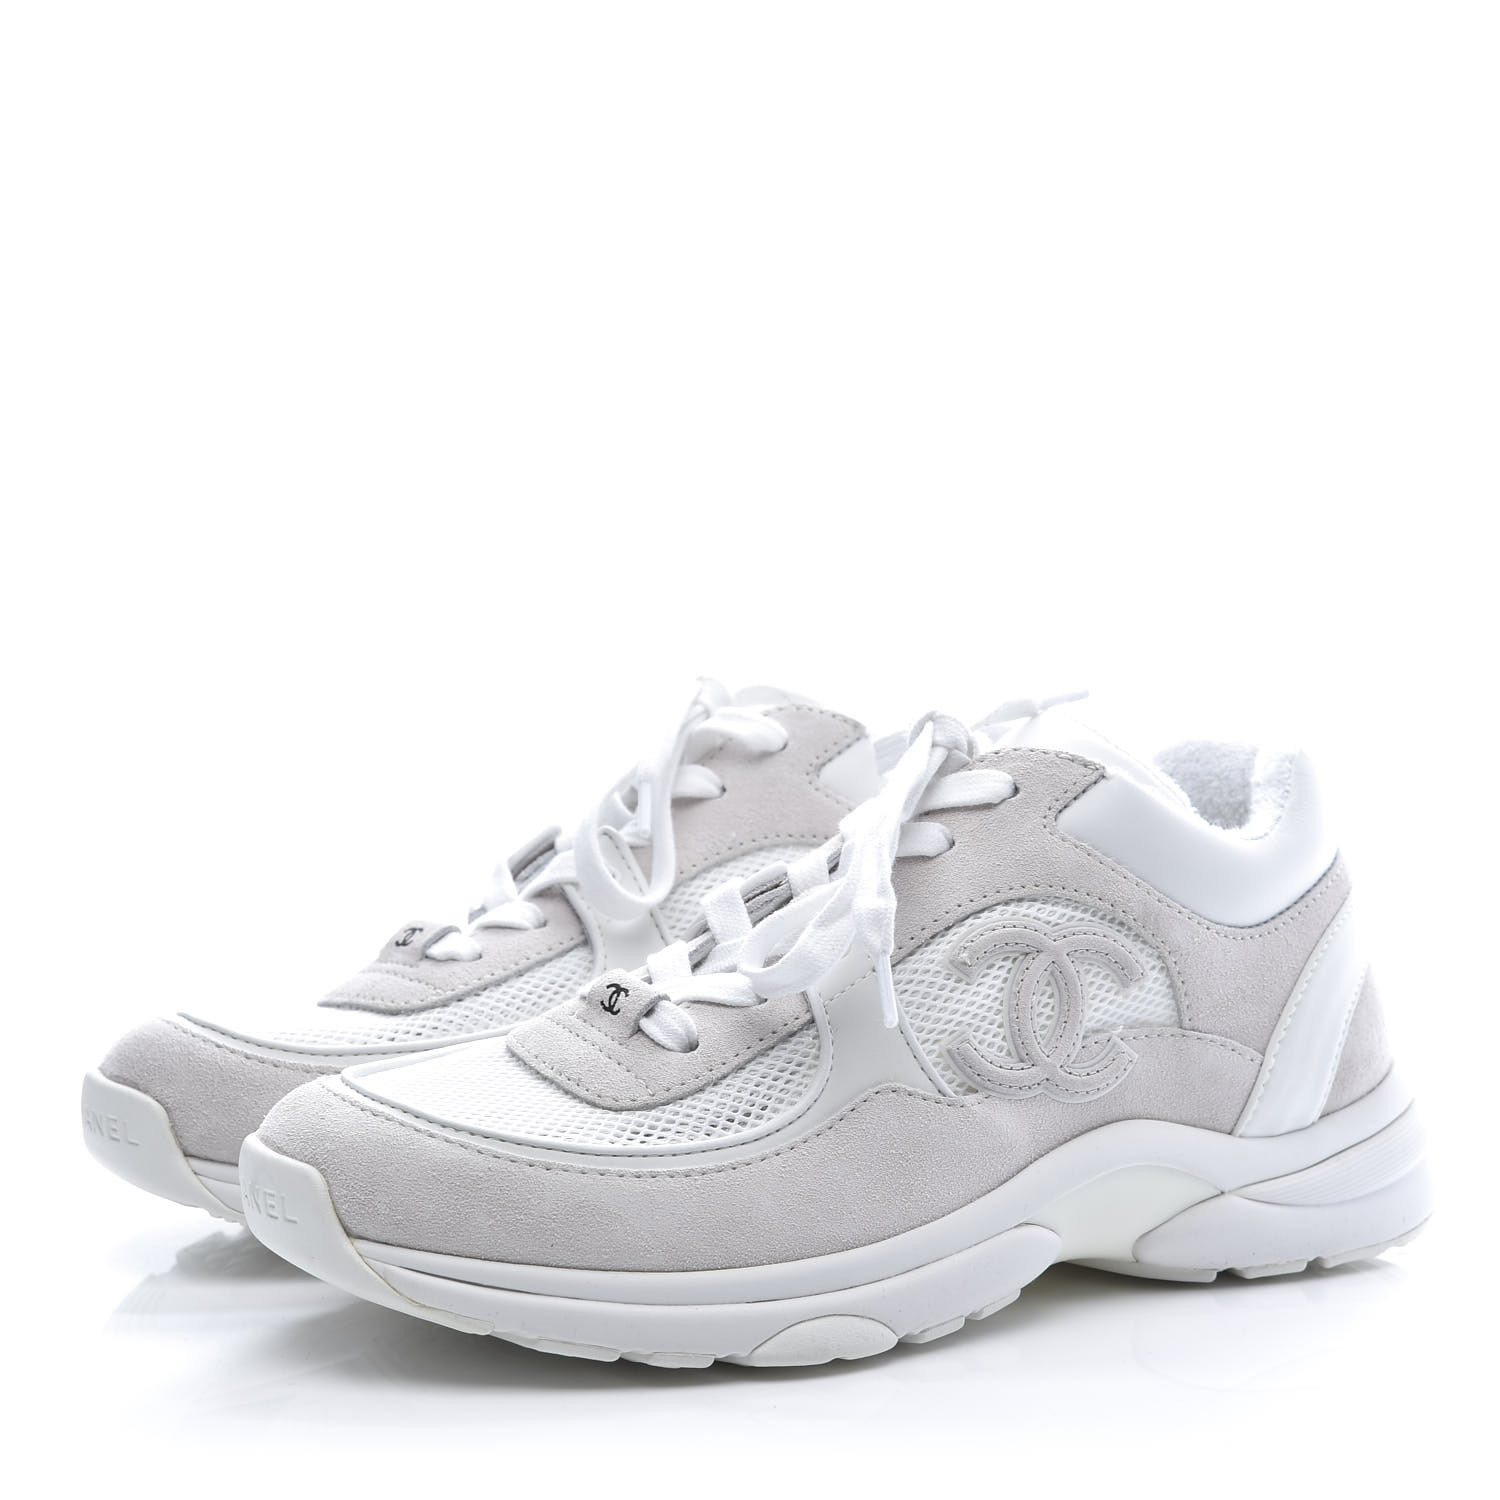 CHANEL Suede Calfskin Fabric CC Sneakers 39 White 599891 | FASHIONPHILE